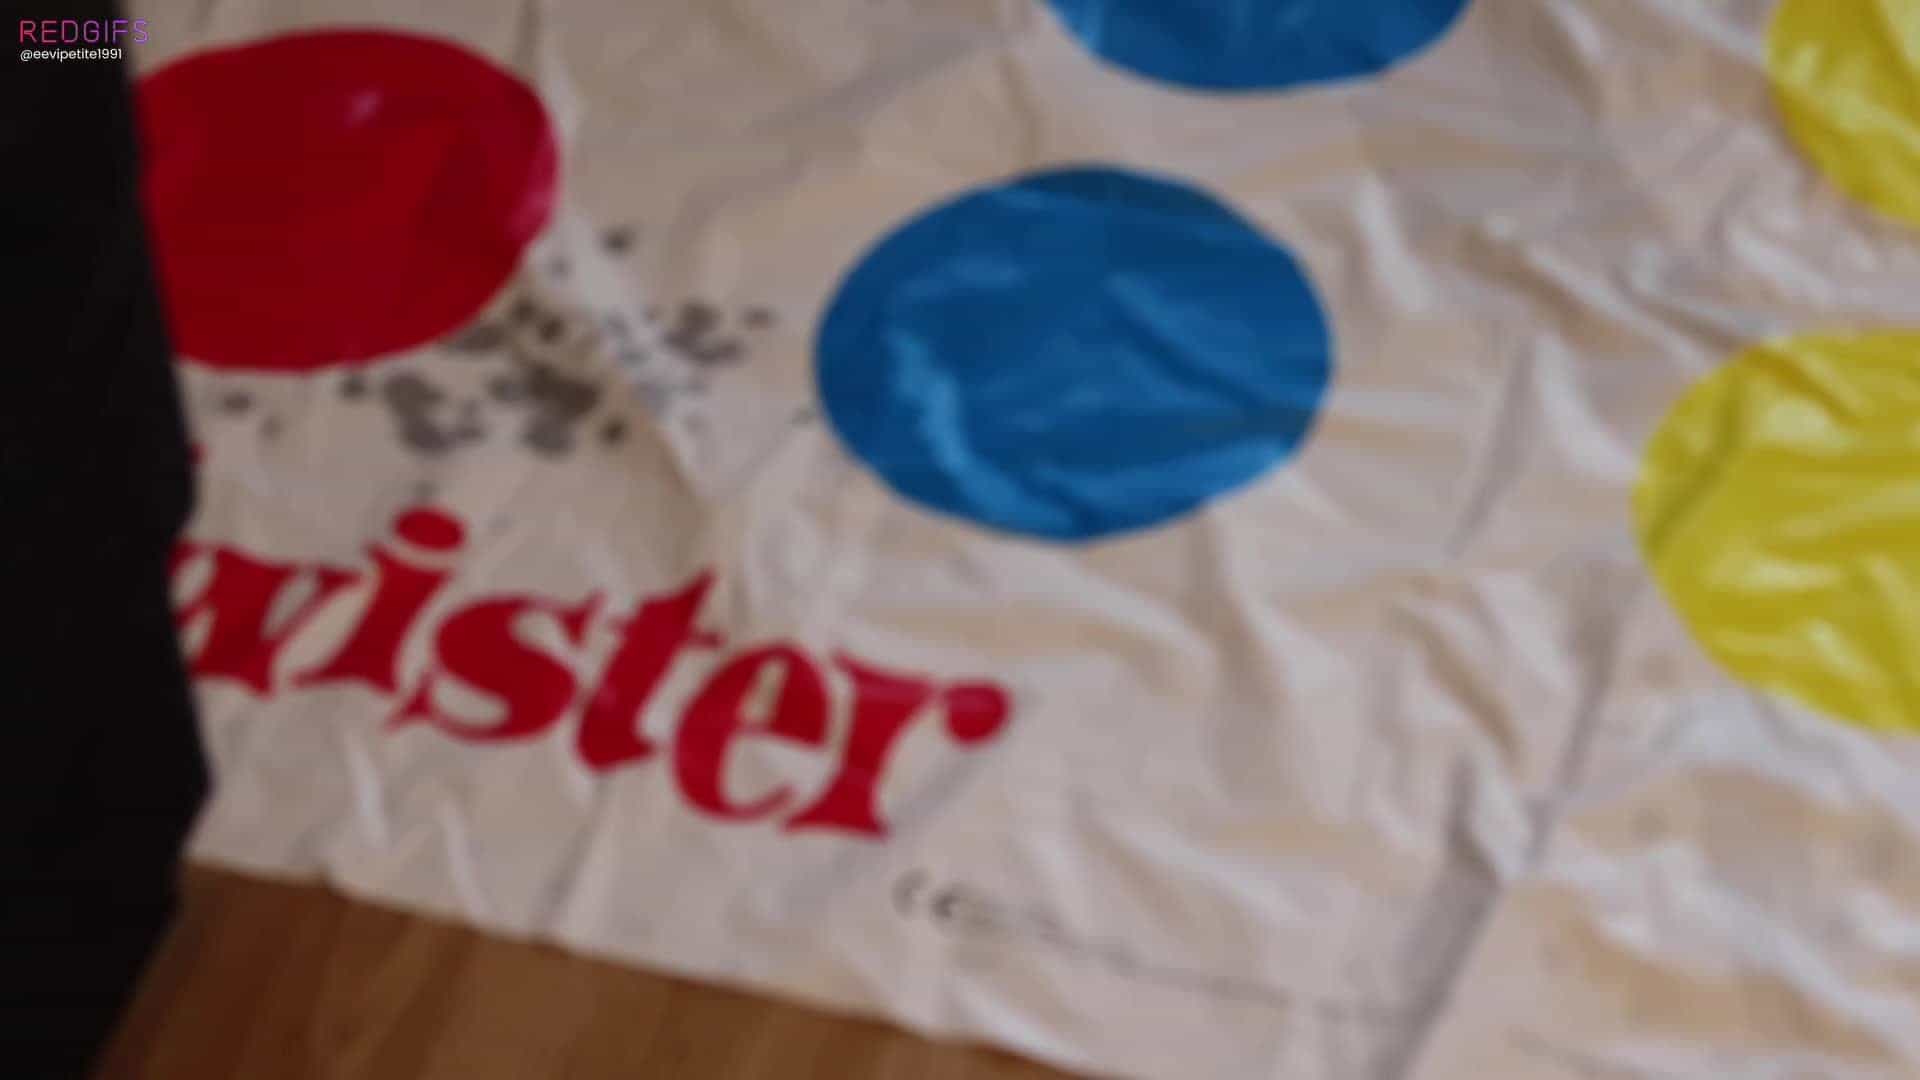 Freeuse Twister is loads of fun for Those who are more into board games and enjoy Happy endings 